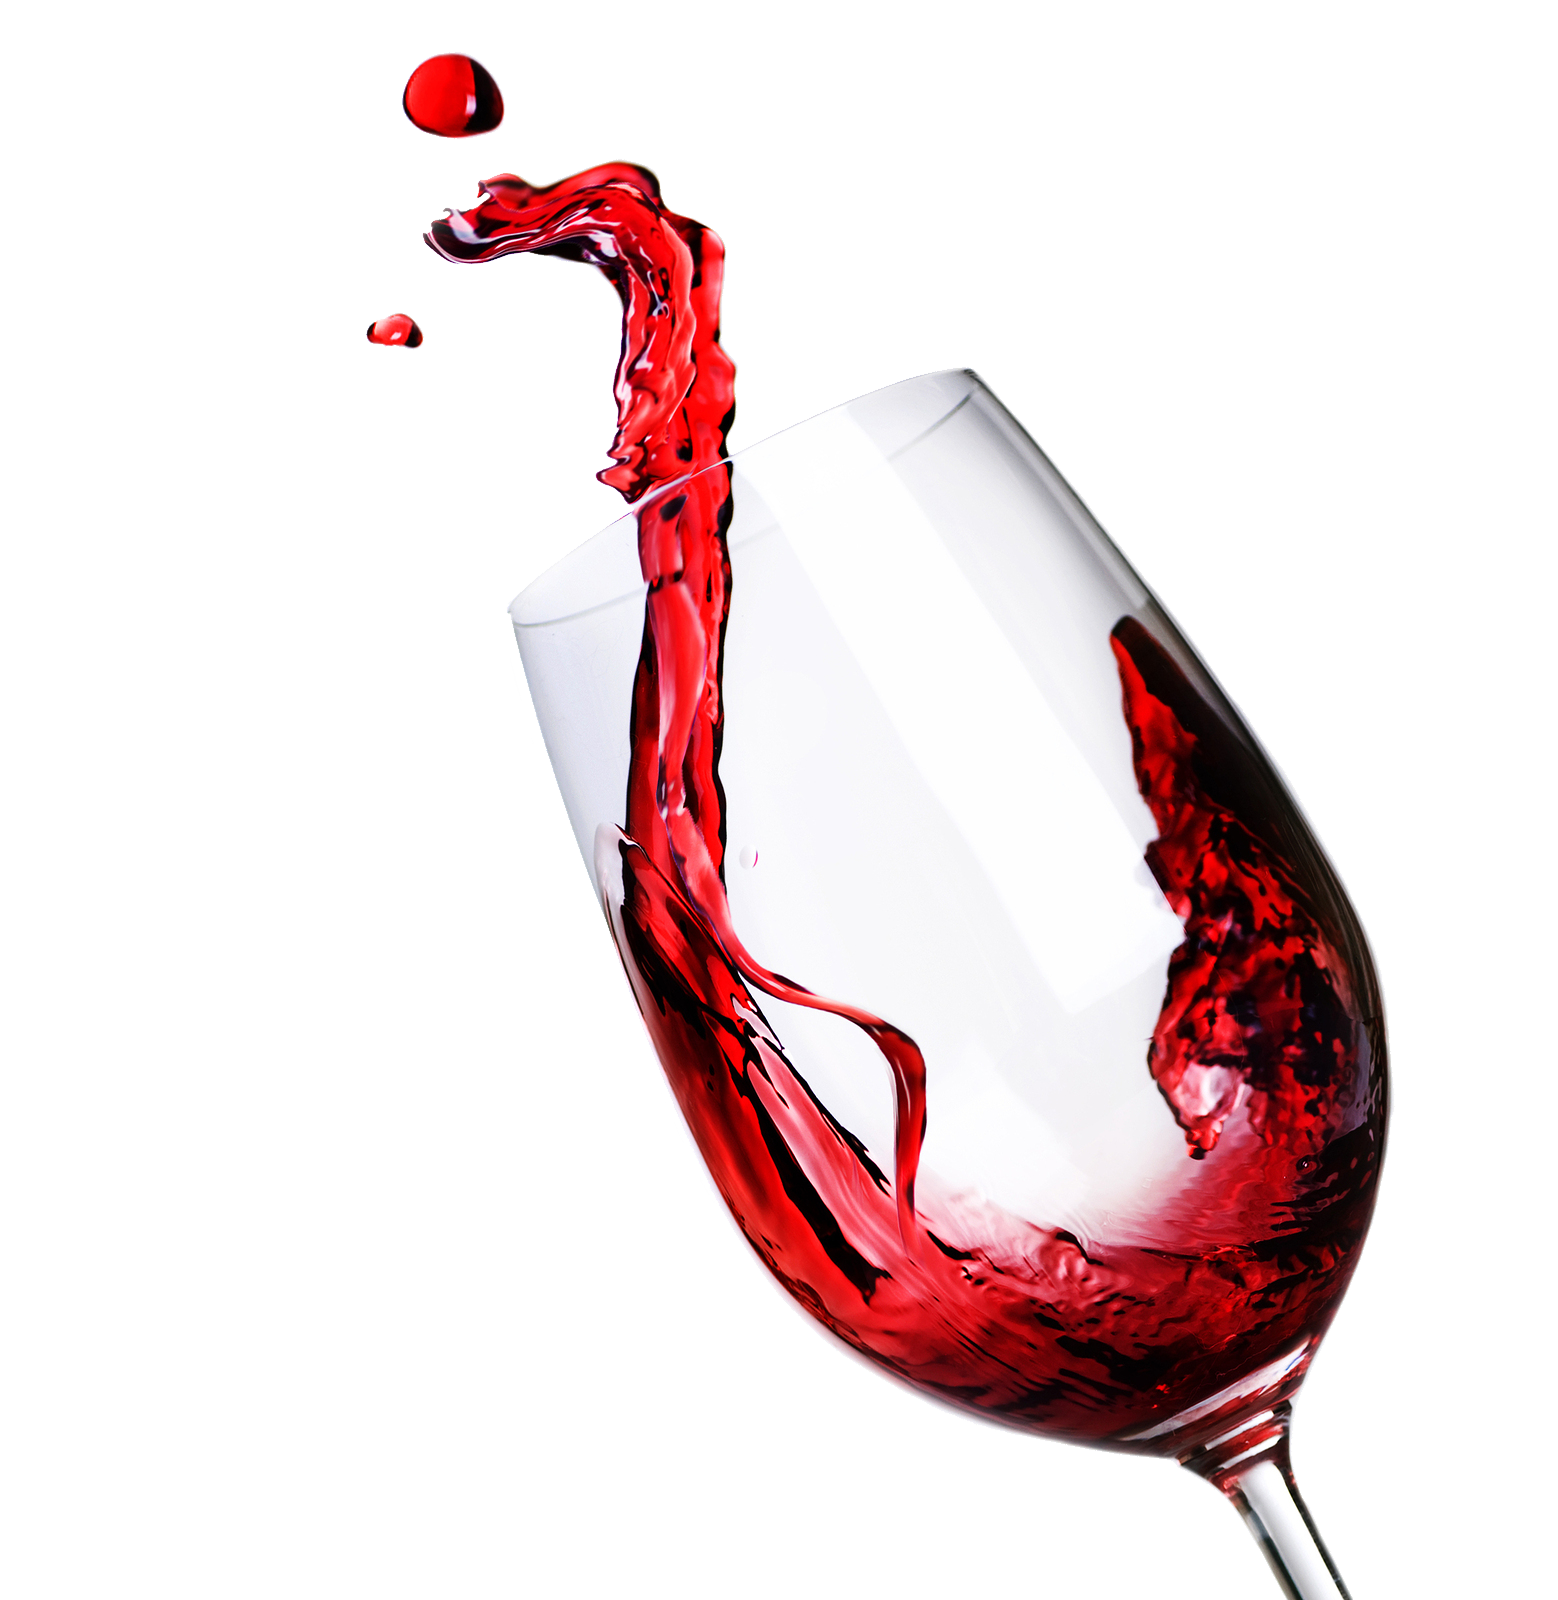 Wine Glass Png Image - Wine, Transparent background PNG HD thumbnail